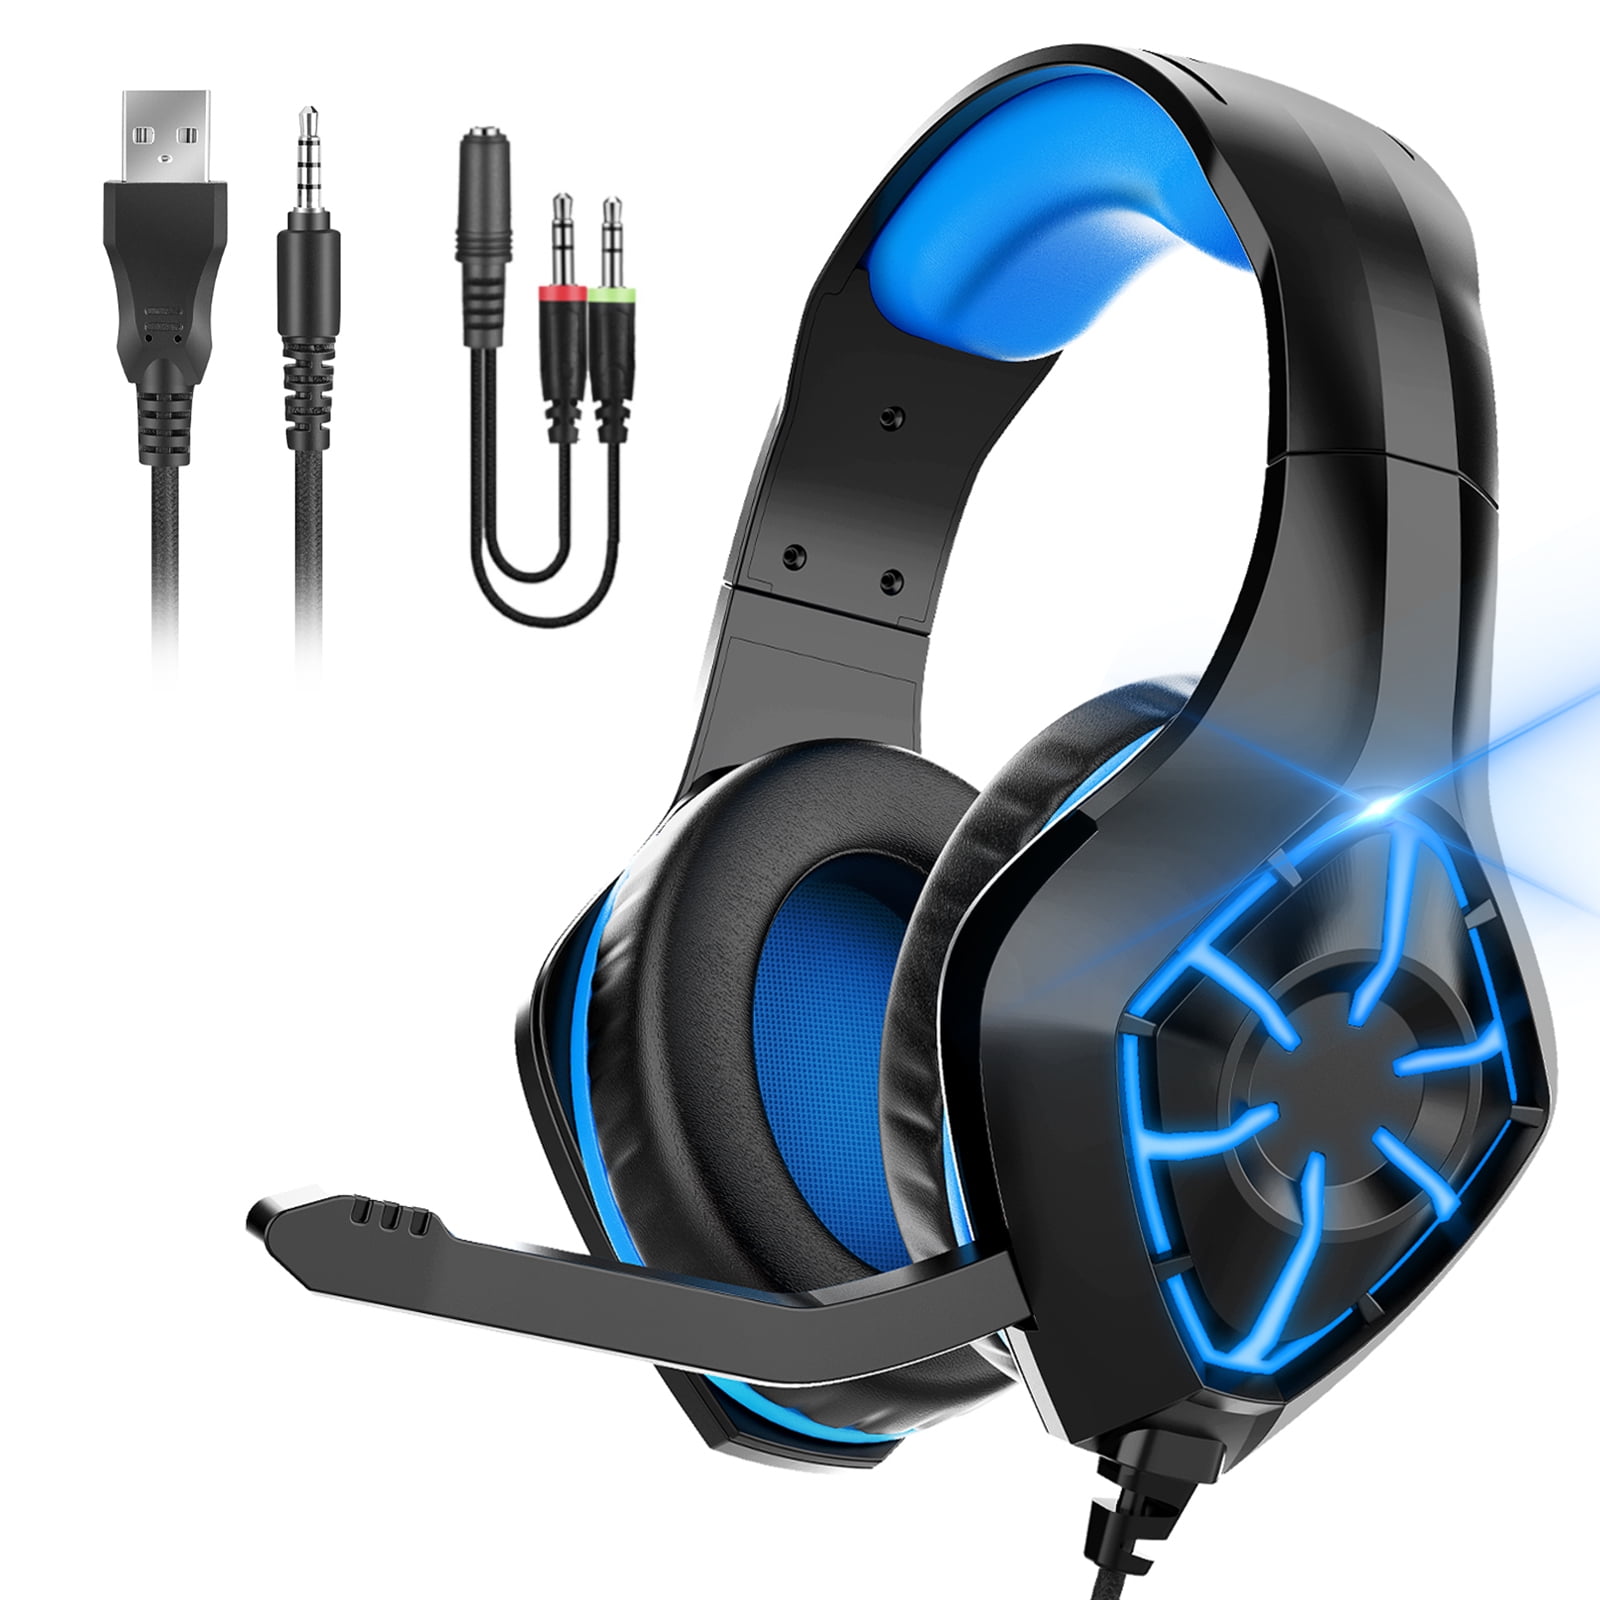 Gaming Headset PS4 Headset, Xbox Headset with 7.1 Surround Sound, Gaming  Headphones with Noise Cancelling Flexible Mic RGB Light Memory Earmuffs for